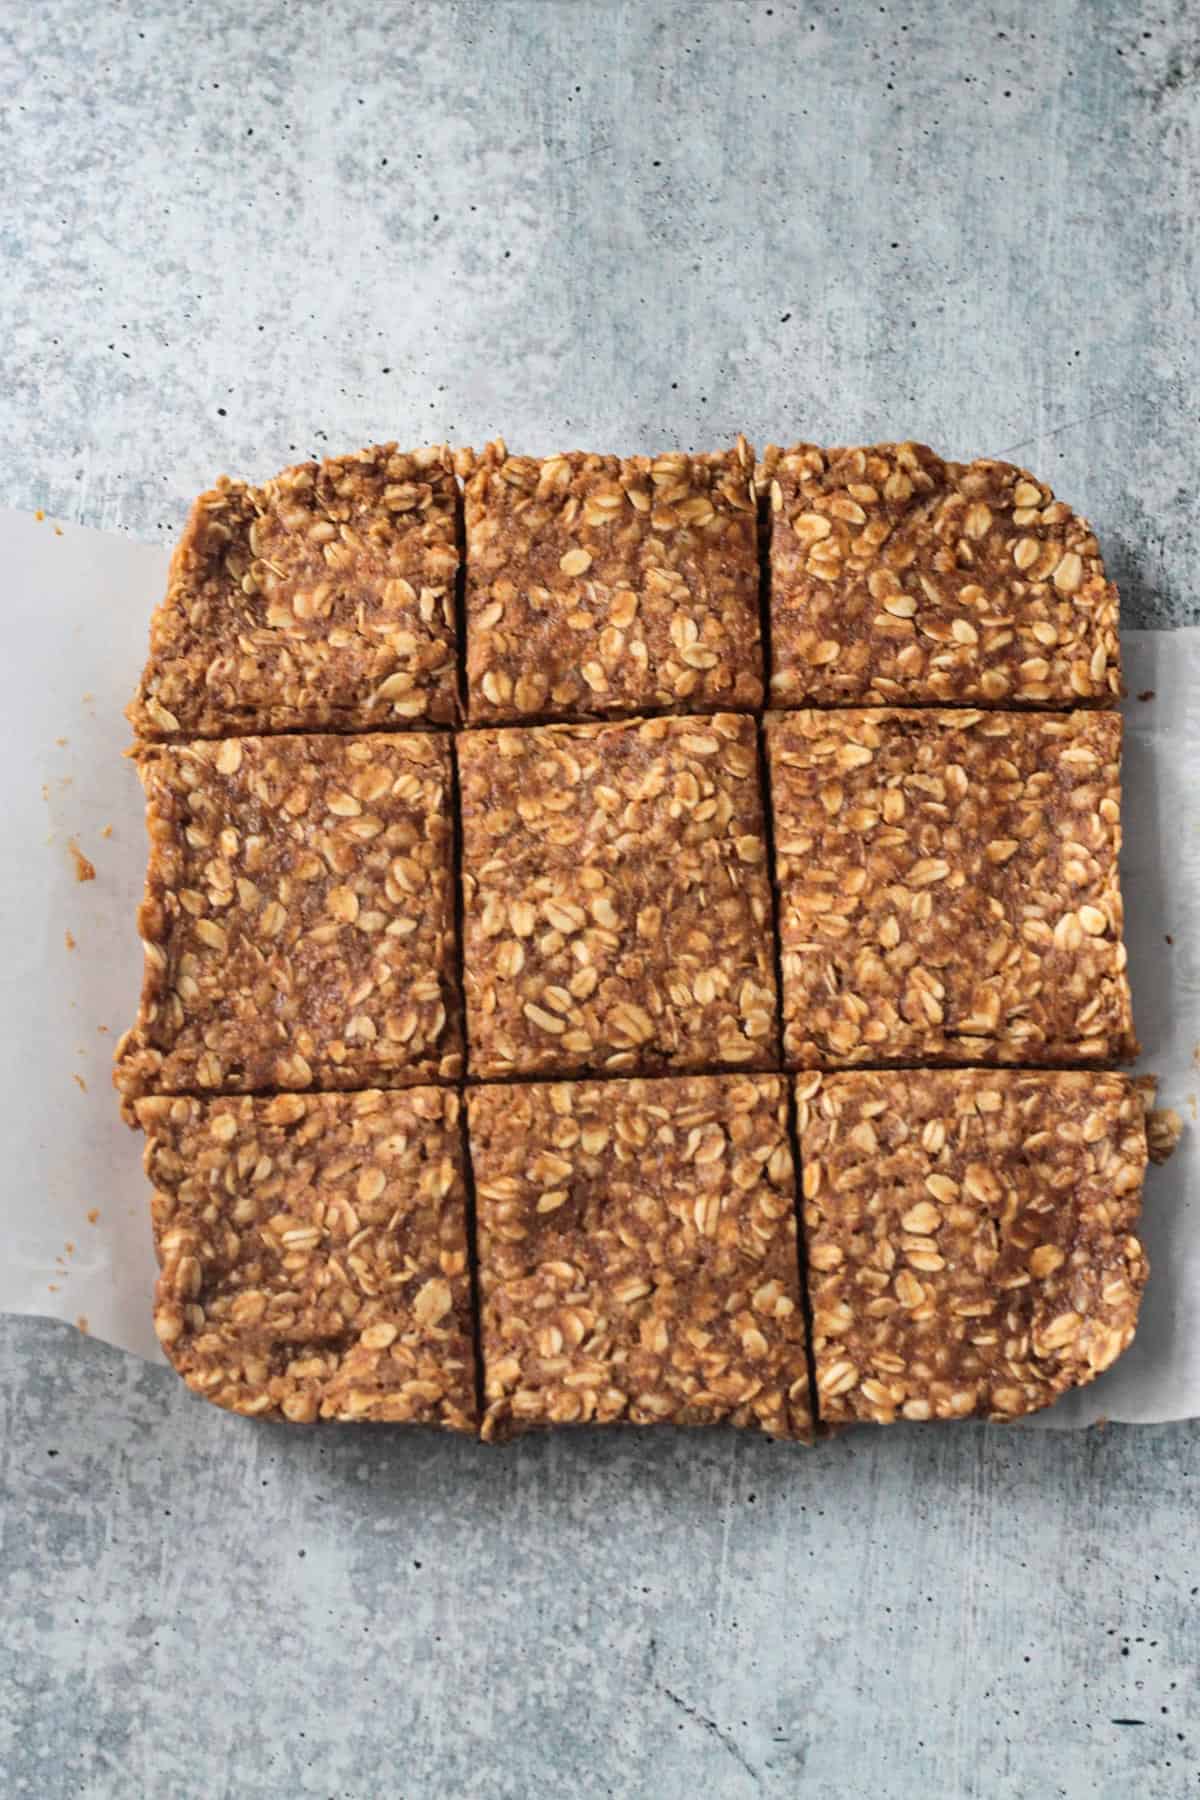 Square of oatmeal bars cut into 9 slices.